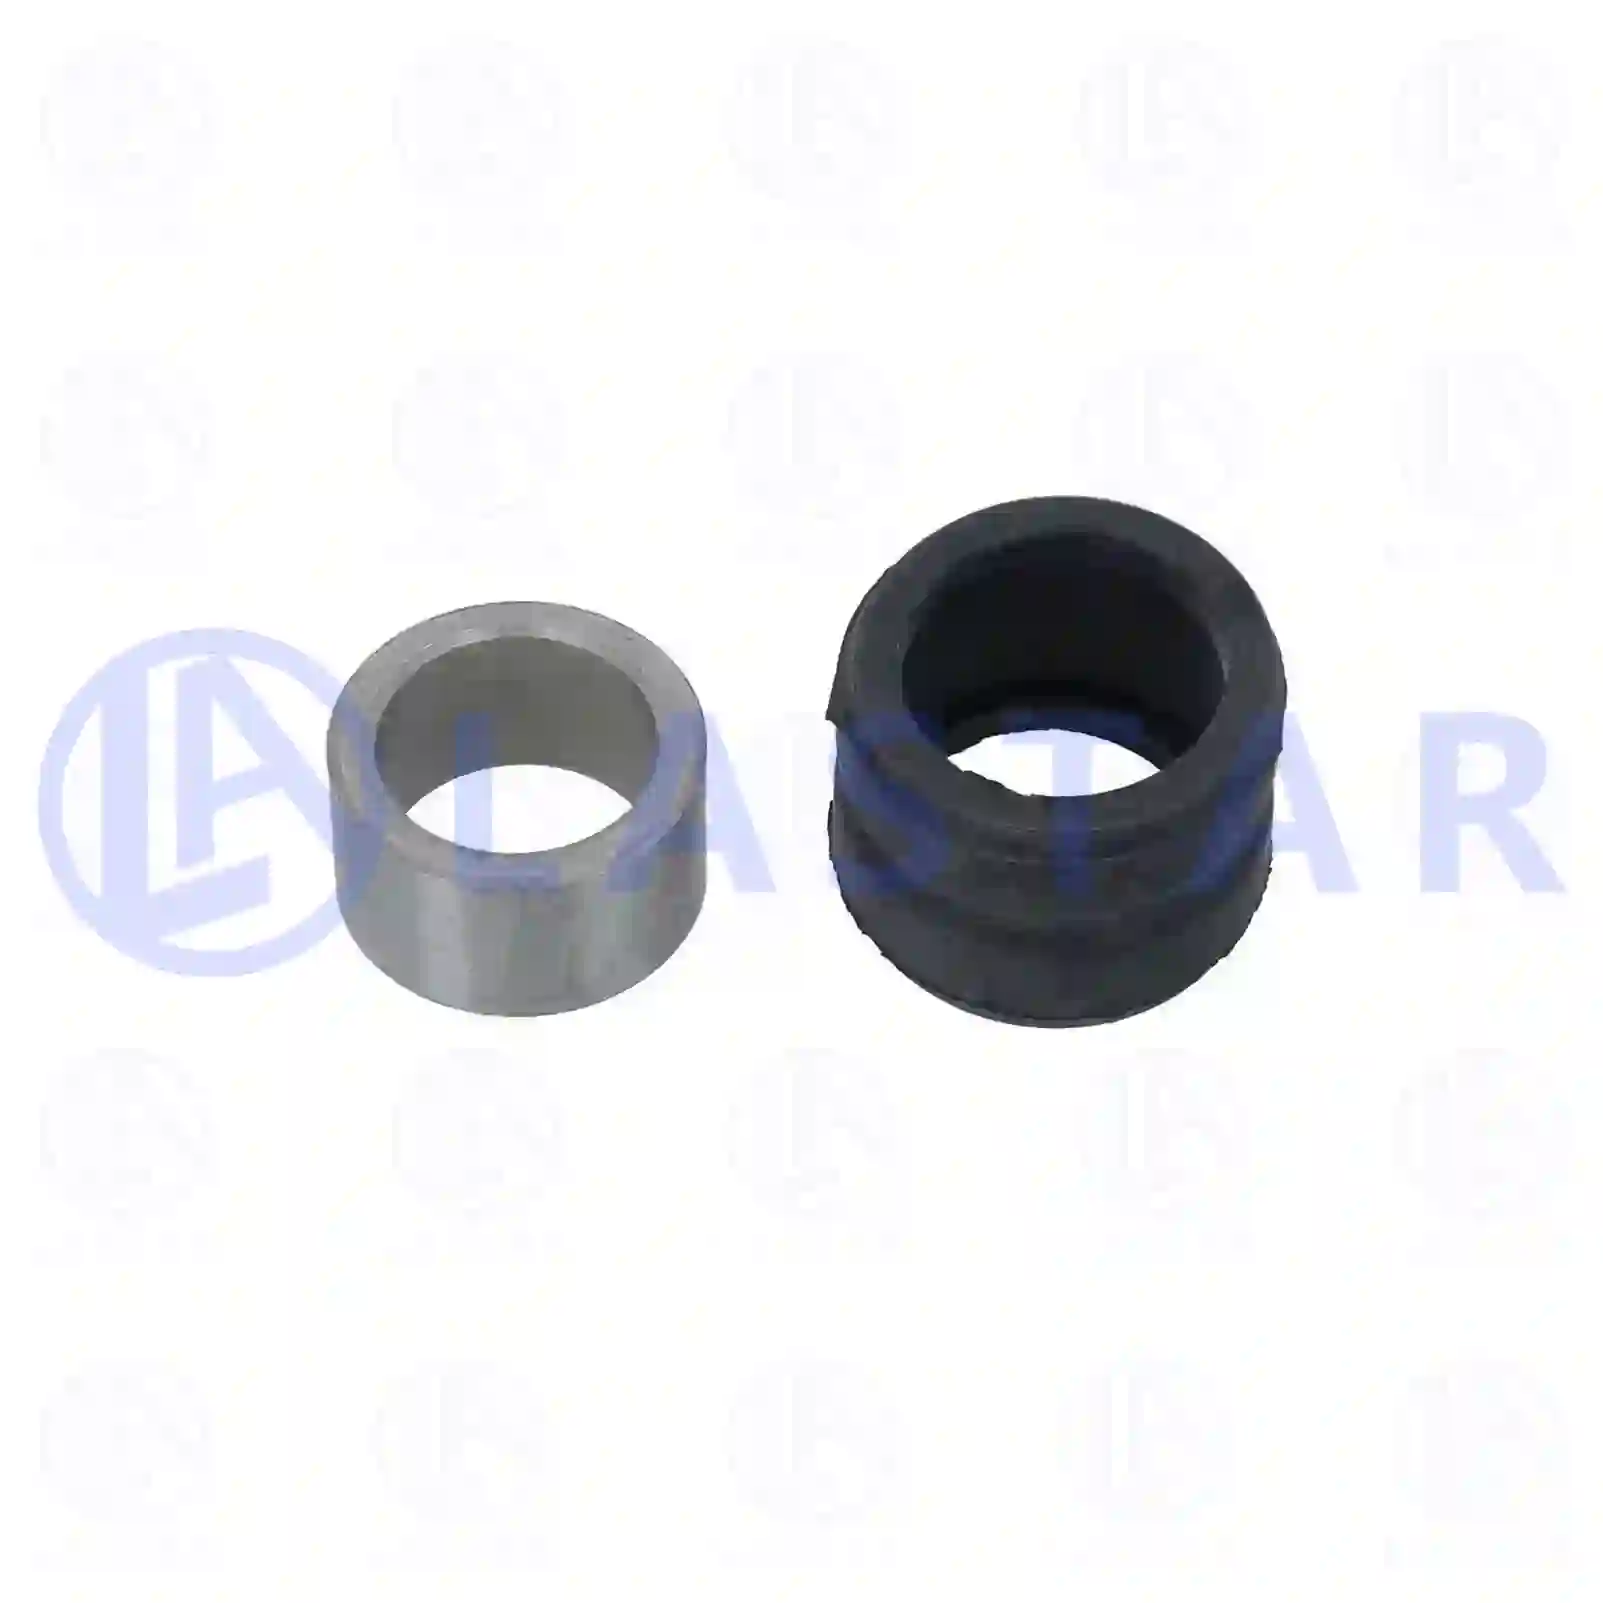 Bushing kit, 77702570, 3124621150S, 3214620165S ||  77702570 Lastar Spare Part | Truck Spare Parts, Auotomotive Spare Parts Bushing kit, 77702570, 3124621150S, 3214620165S ||  77702570 Lastar Spare Part | Truck Spare Parts, Auotomotive Spare Parts